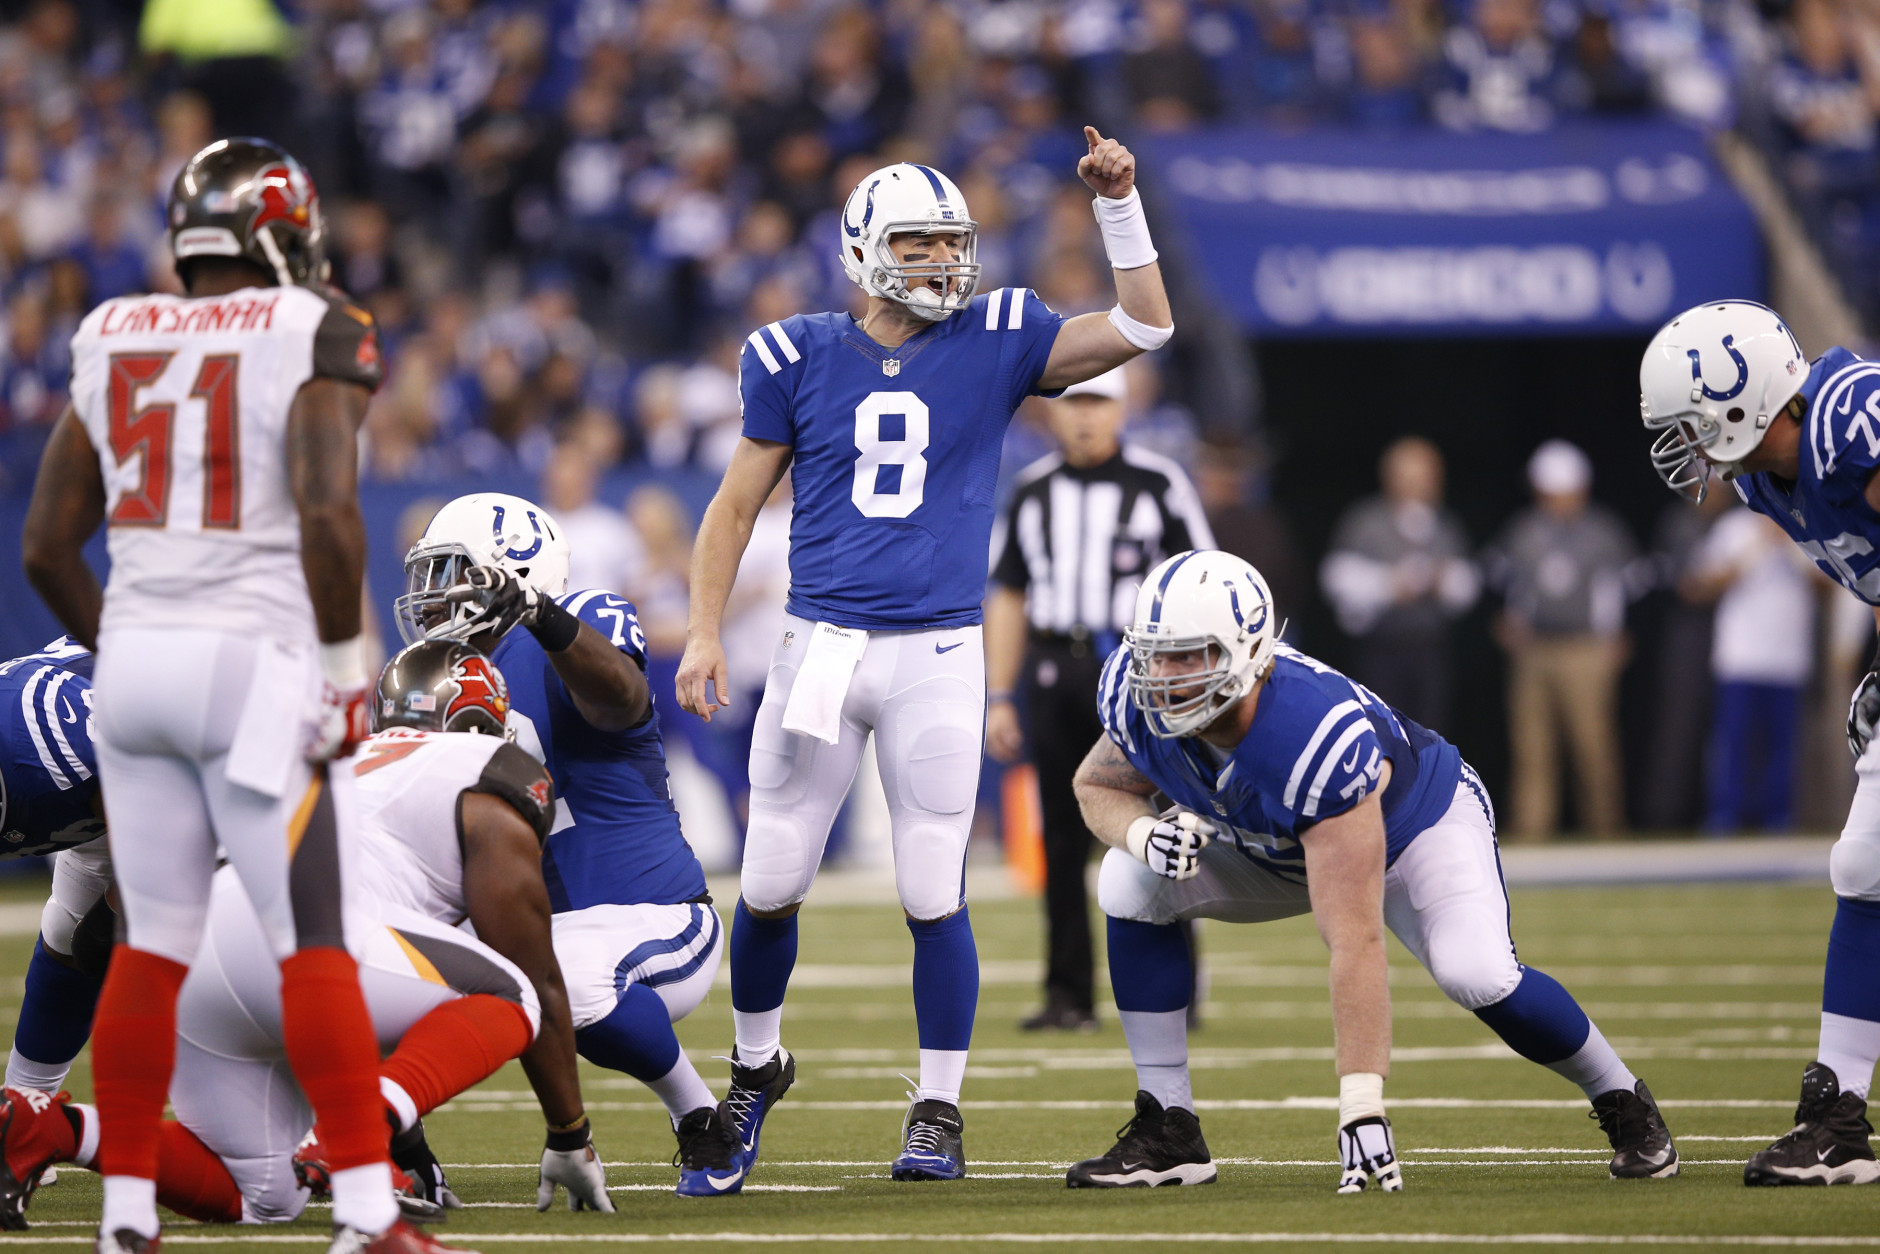 INDIANAPOLIS, IN - NOVEMBER 29: Matt Hasselbeck #8 of the Indianapolis Colts calls a play at the line of scrimmage in the first quarter against the Tampa Bay Buccaneers in Indianapolis, Indiana. (Photo by Joe Robbins/Getty Images)